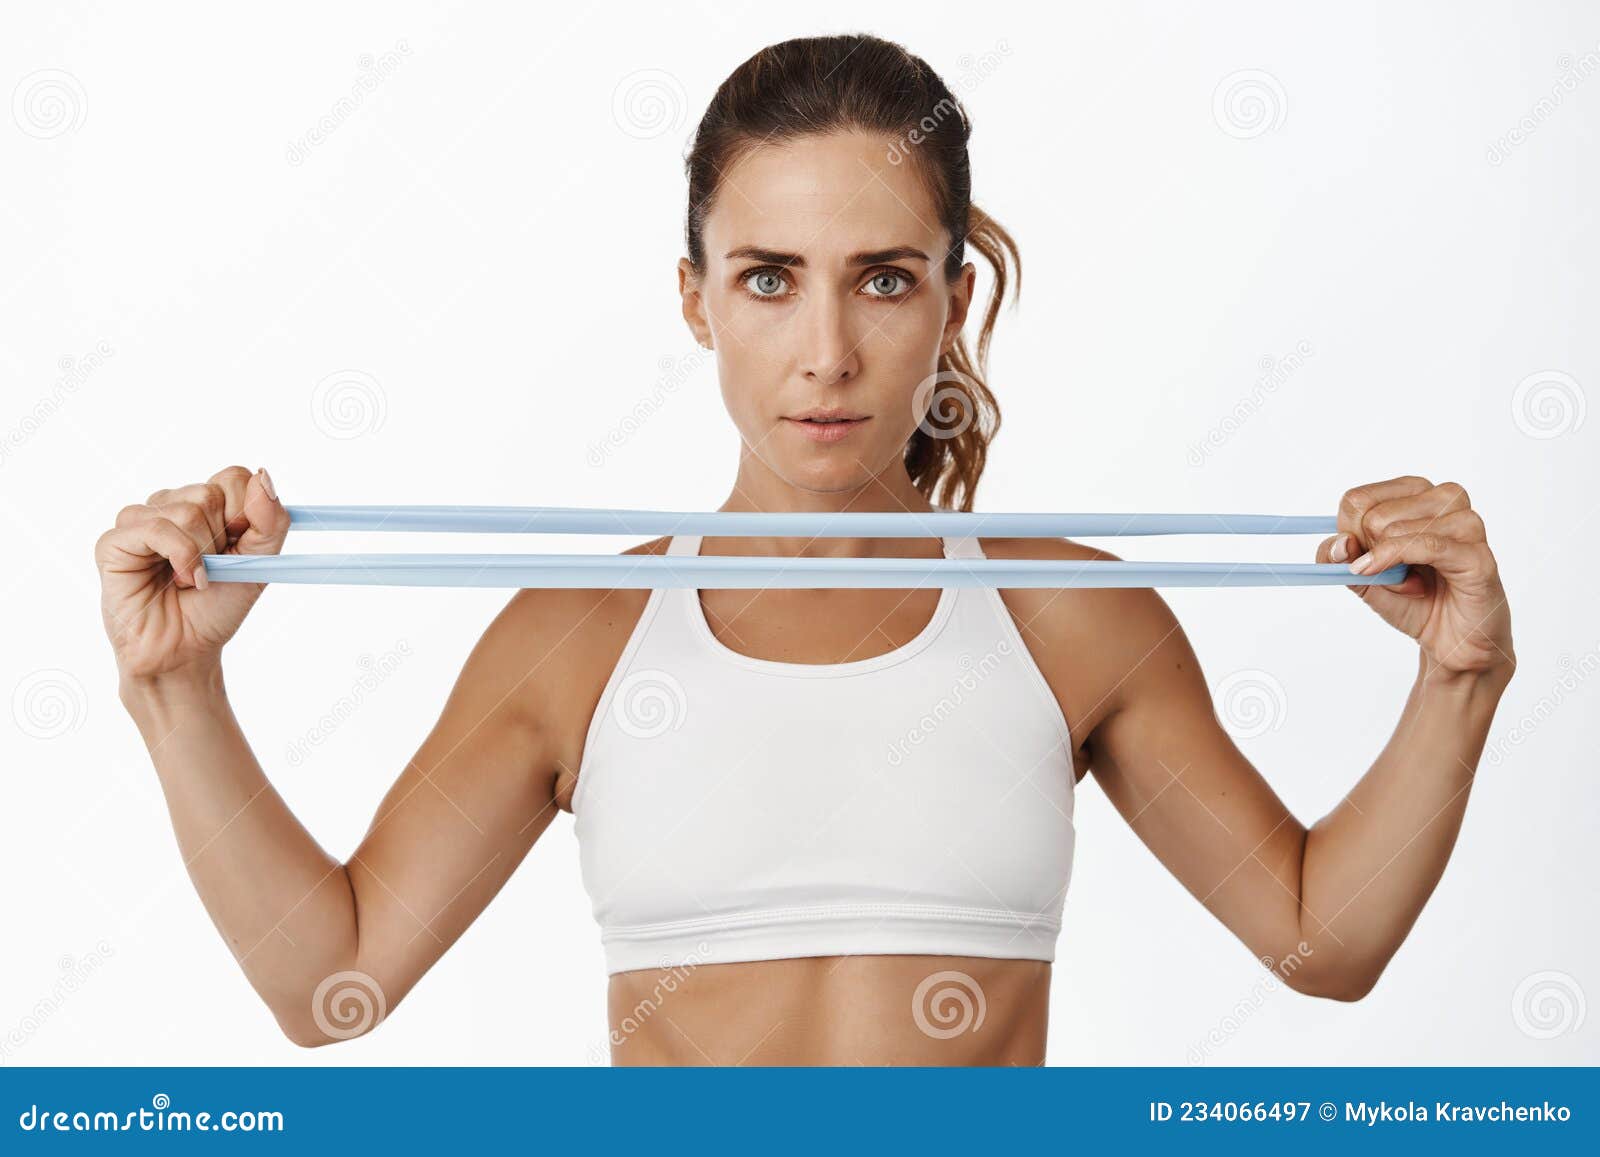 https://thumbs.dreamstime.com/z/portrait-confident-sportswoman-stretching-elastic-band-arms-workout-training-gym-standing-over-white-portrait-234066497.jpg